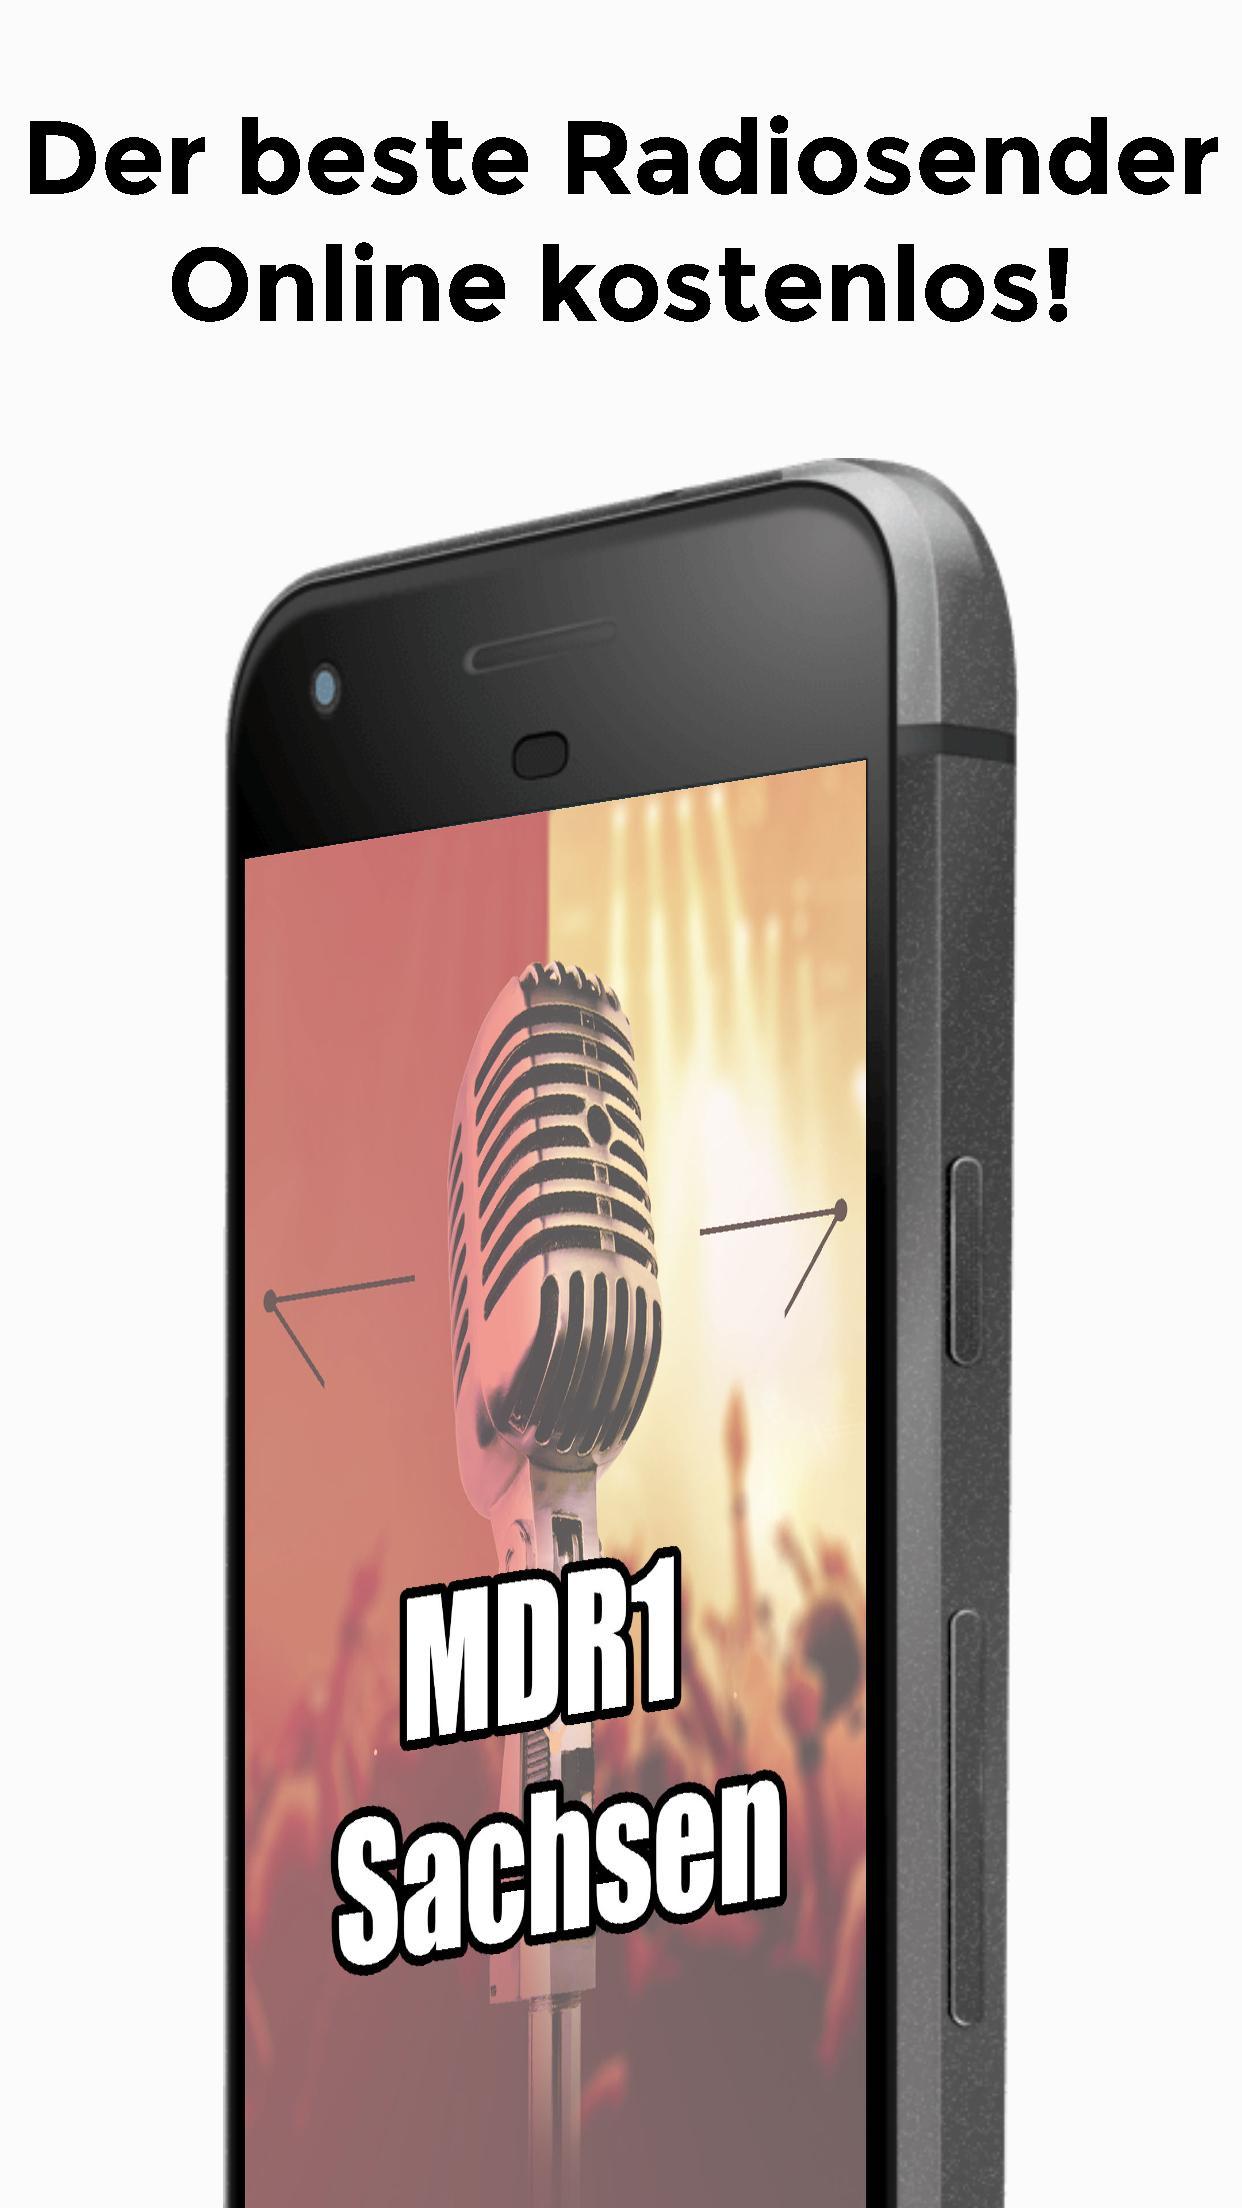 MDR1 Radio Sachsen for Android - APK Download